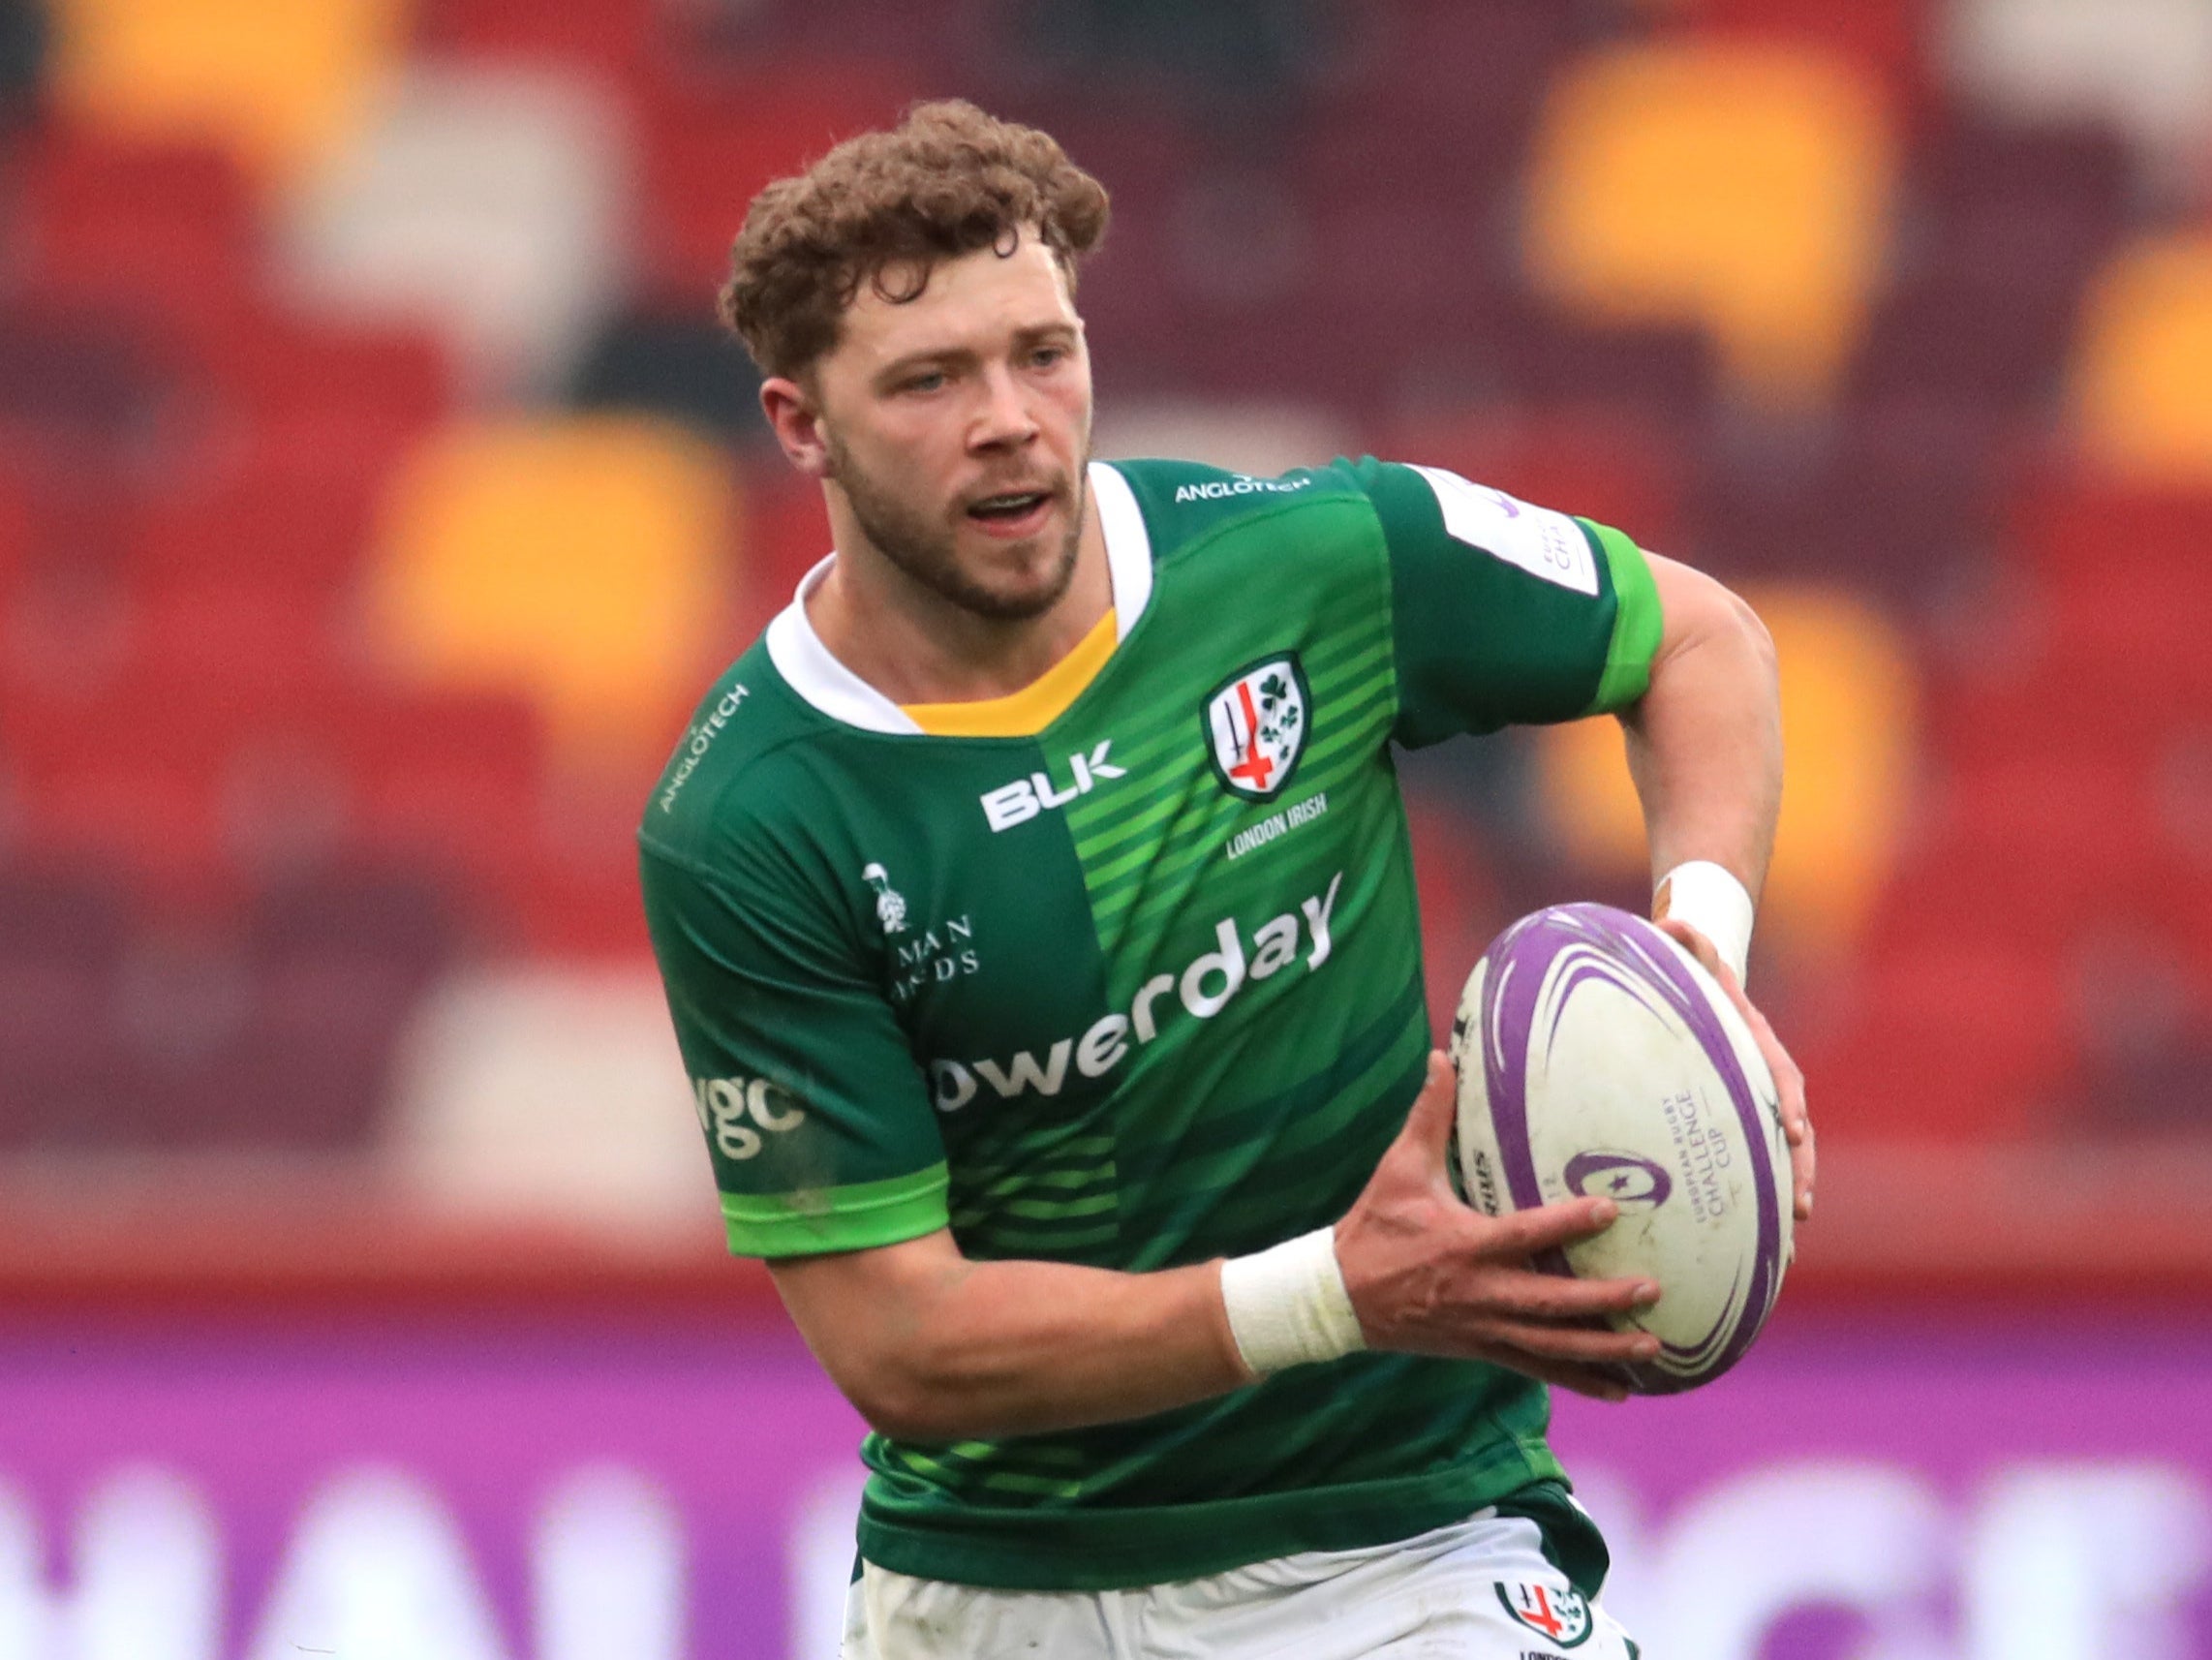 London Irish back Theo Brophy Clews has retired